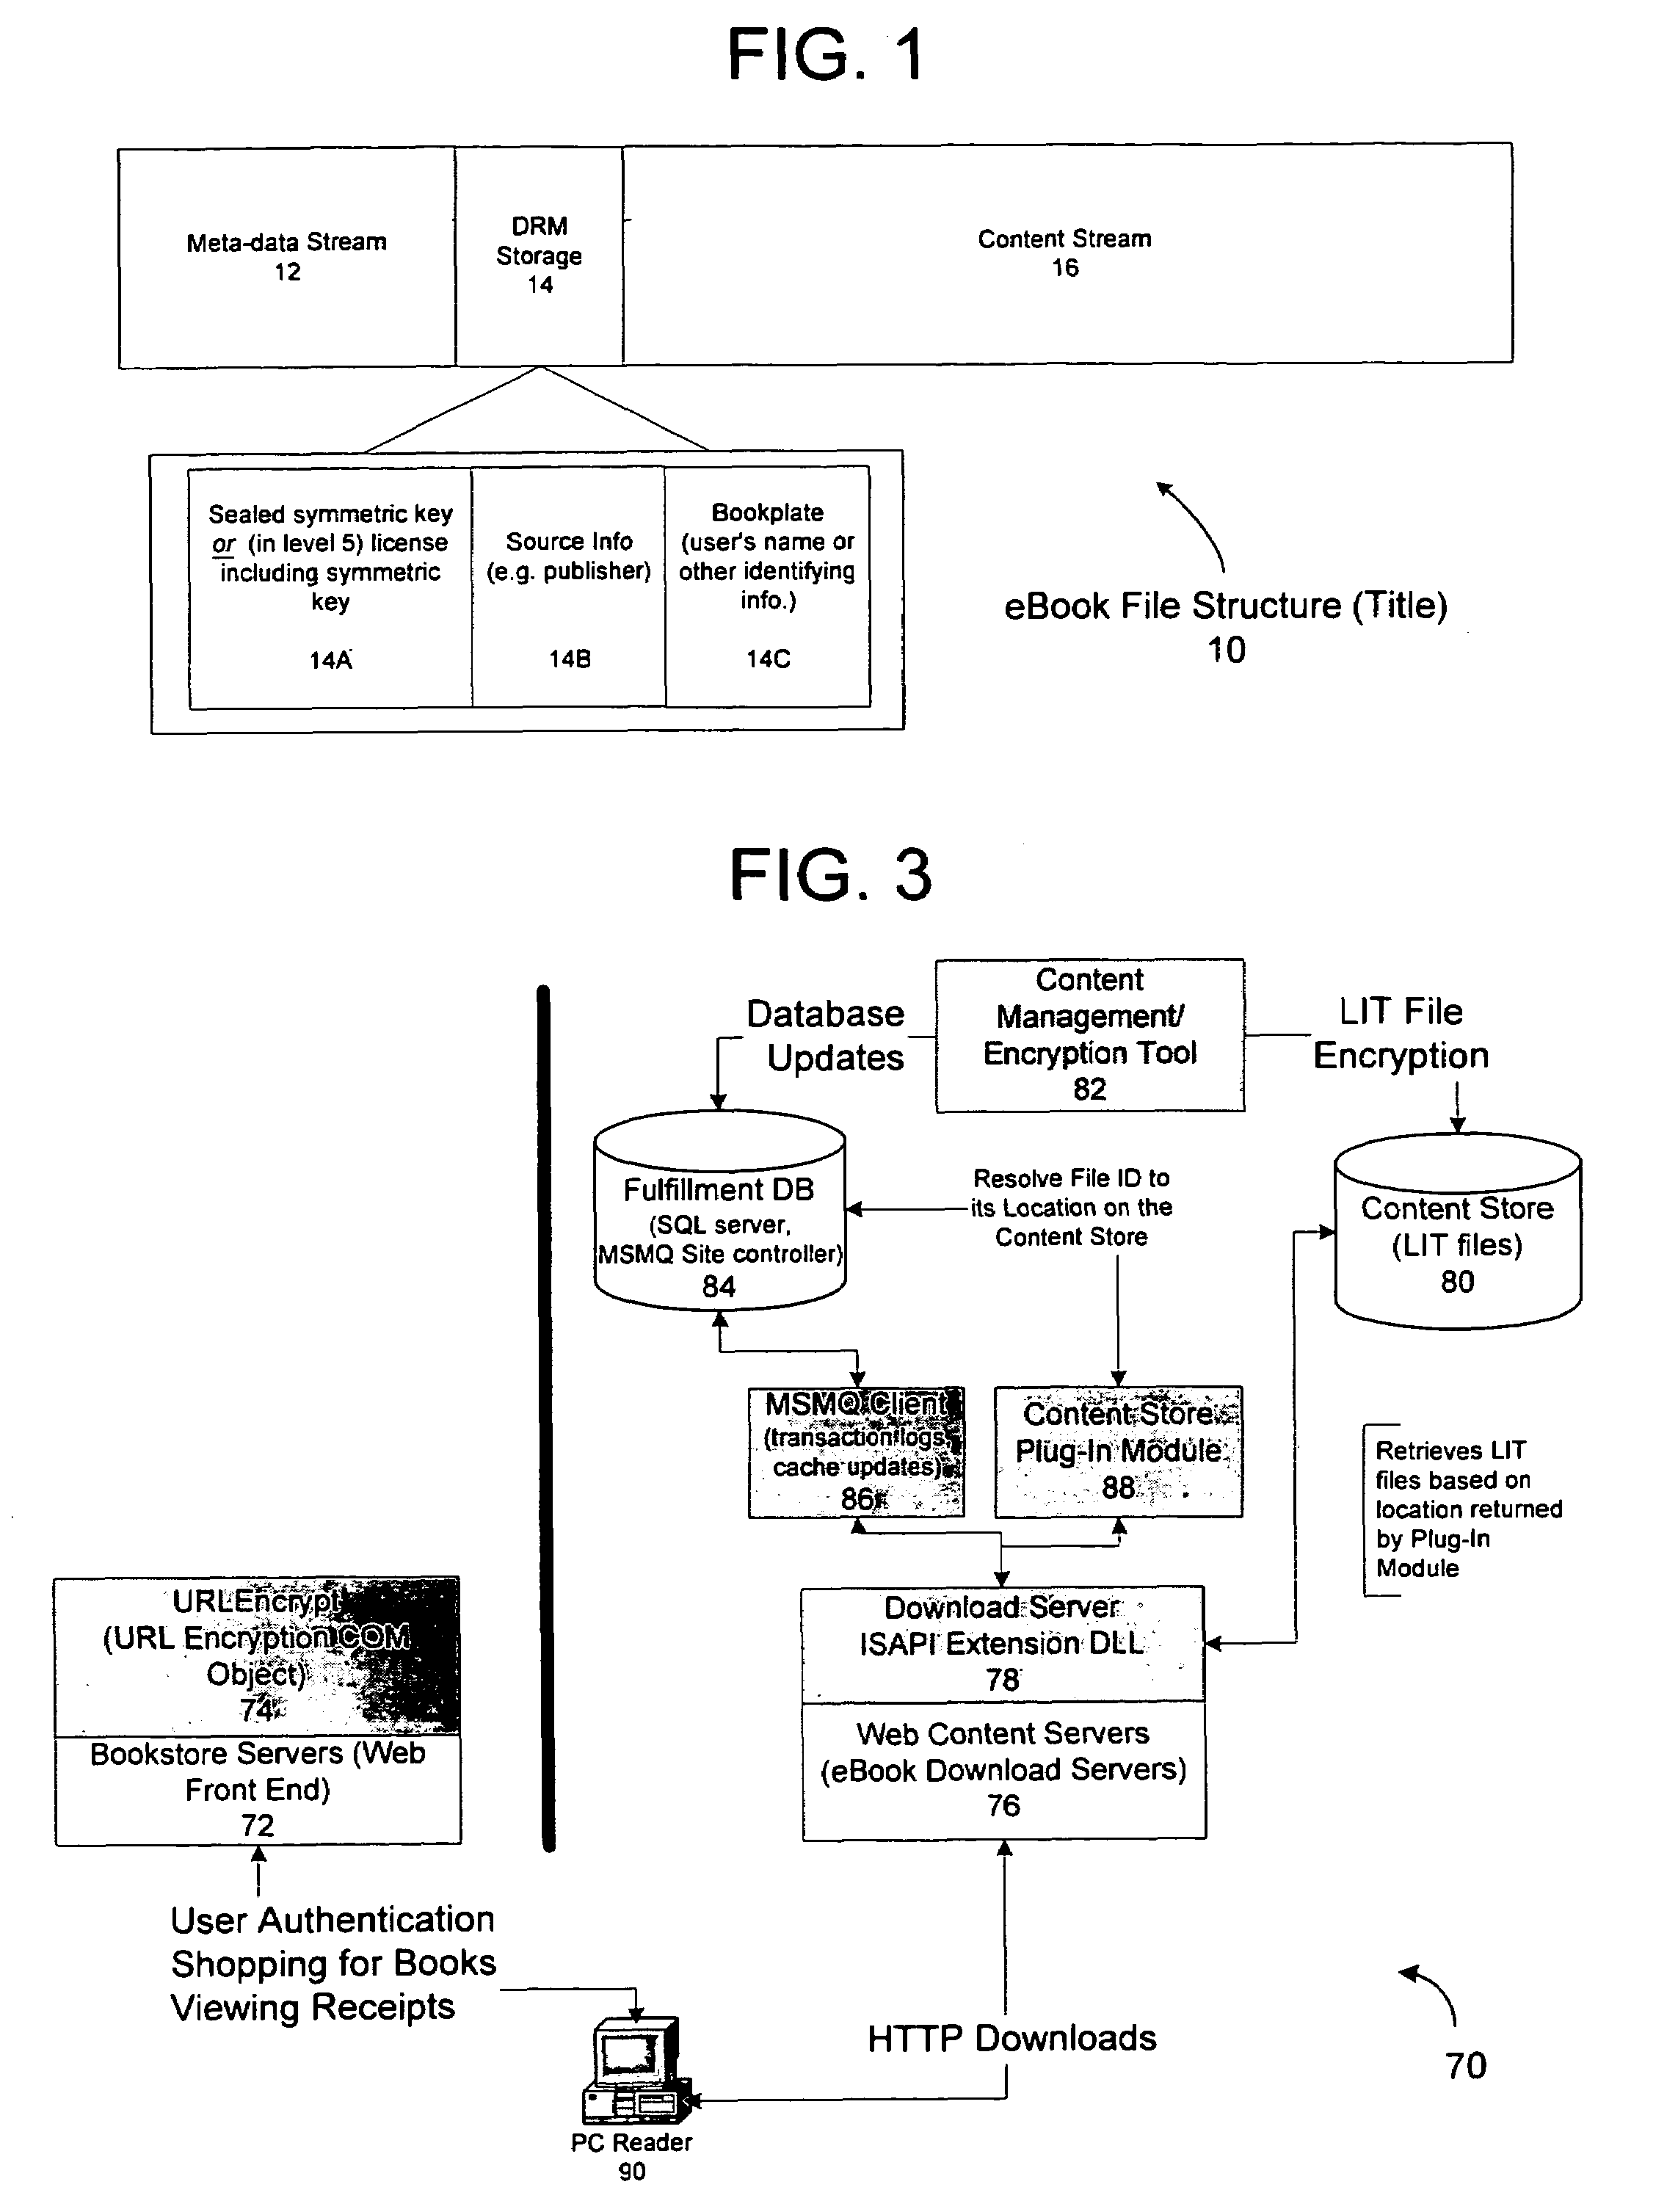 Inter-server communication using request with encrypted parameter